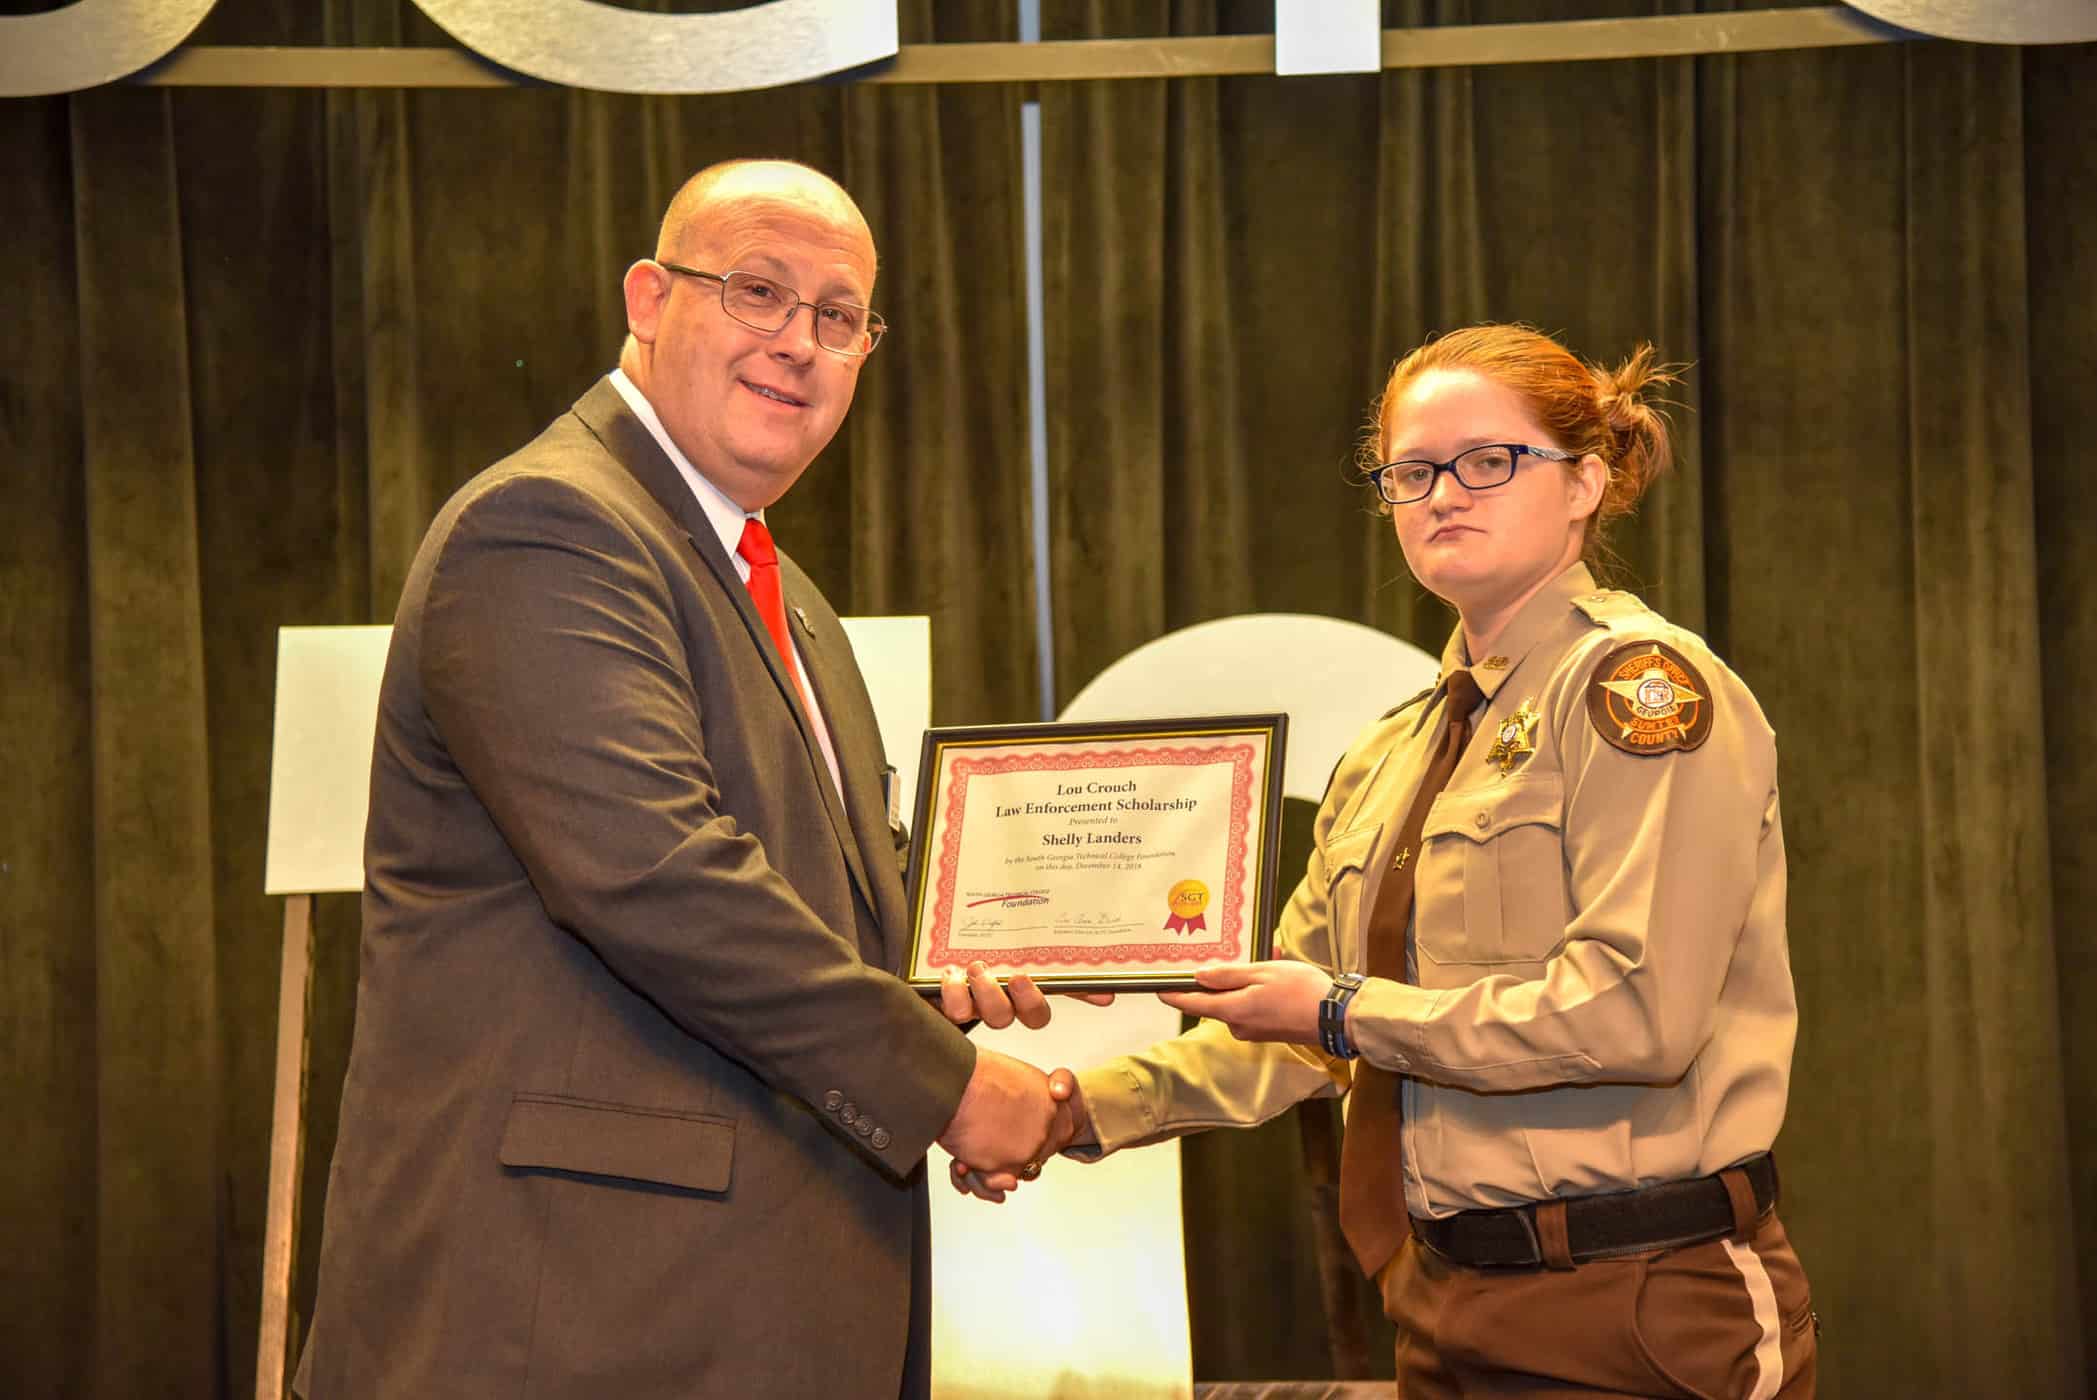 South Georgia Technical College Law Enforcement Academy Director Brett Murray is shown above presenting the Lou Crouch Scholarship to Shelly Landers of Americus at the SGTC Law Enforcement Academy graduation 18-02 recently. Lou Crouch was unable to attend.